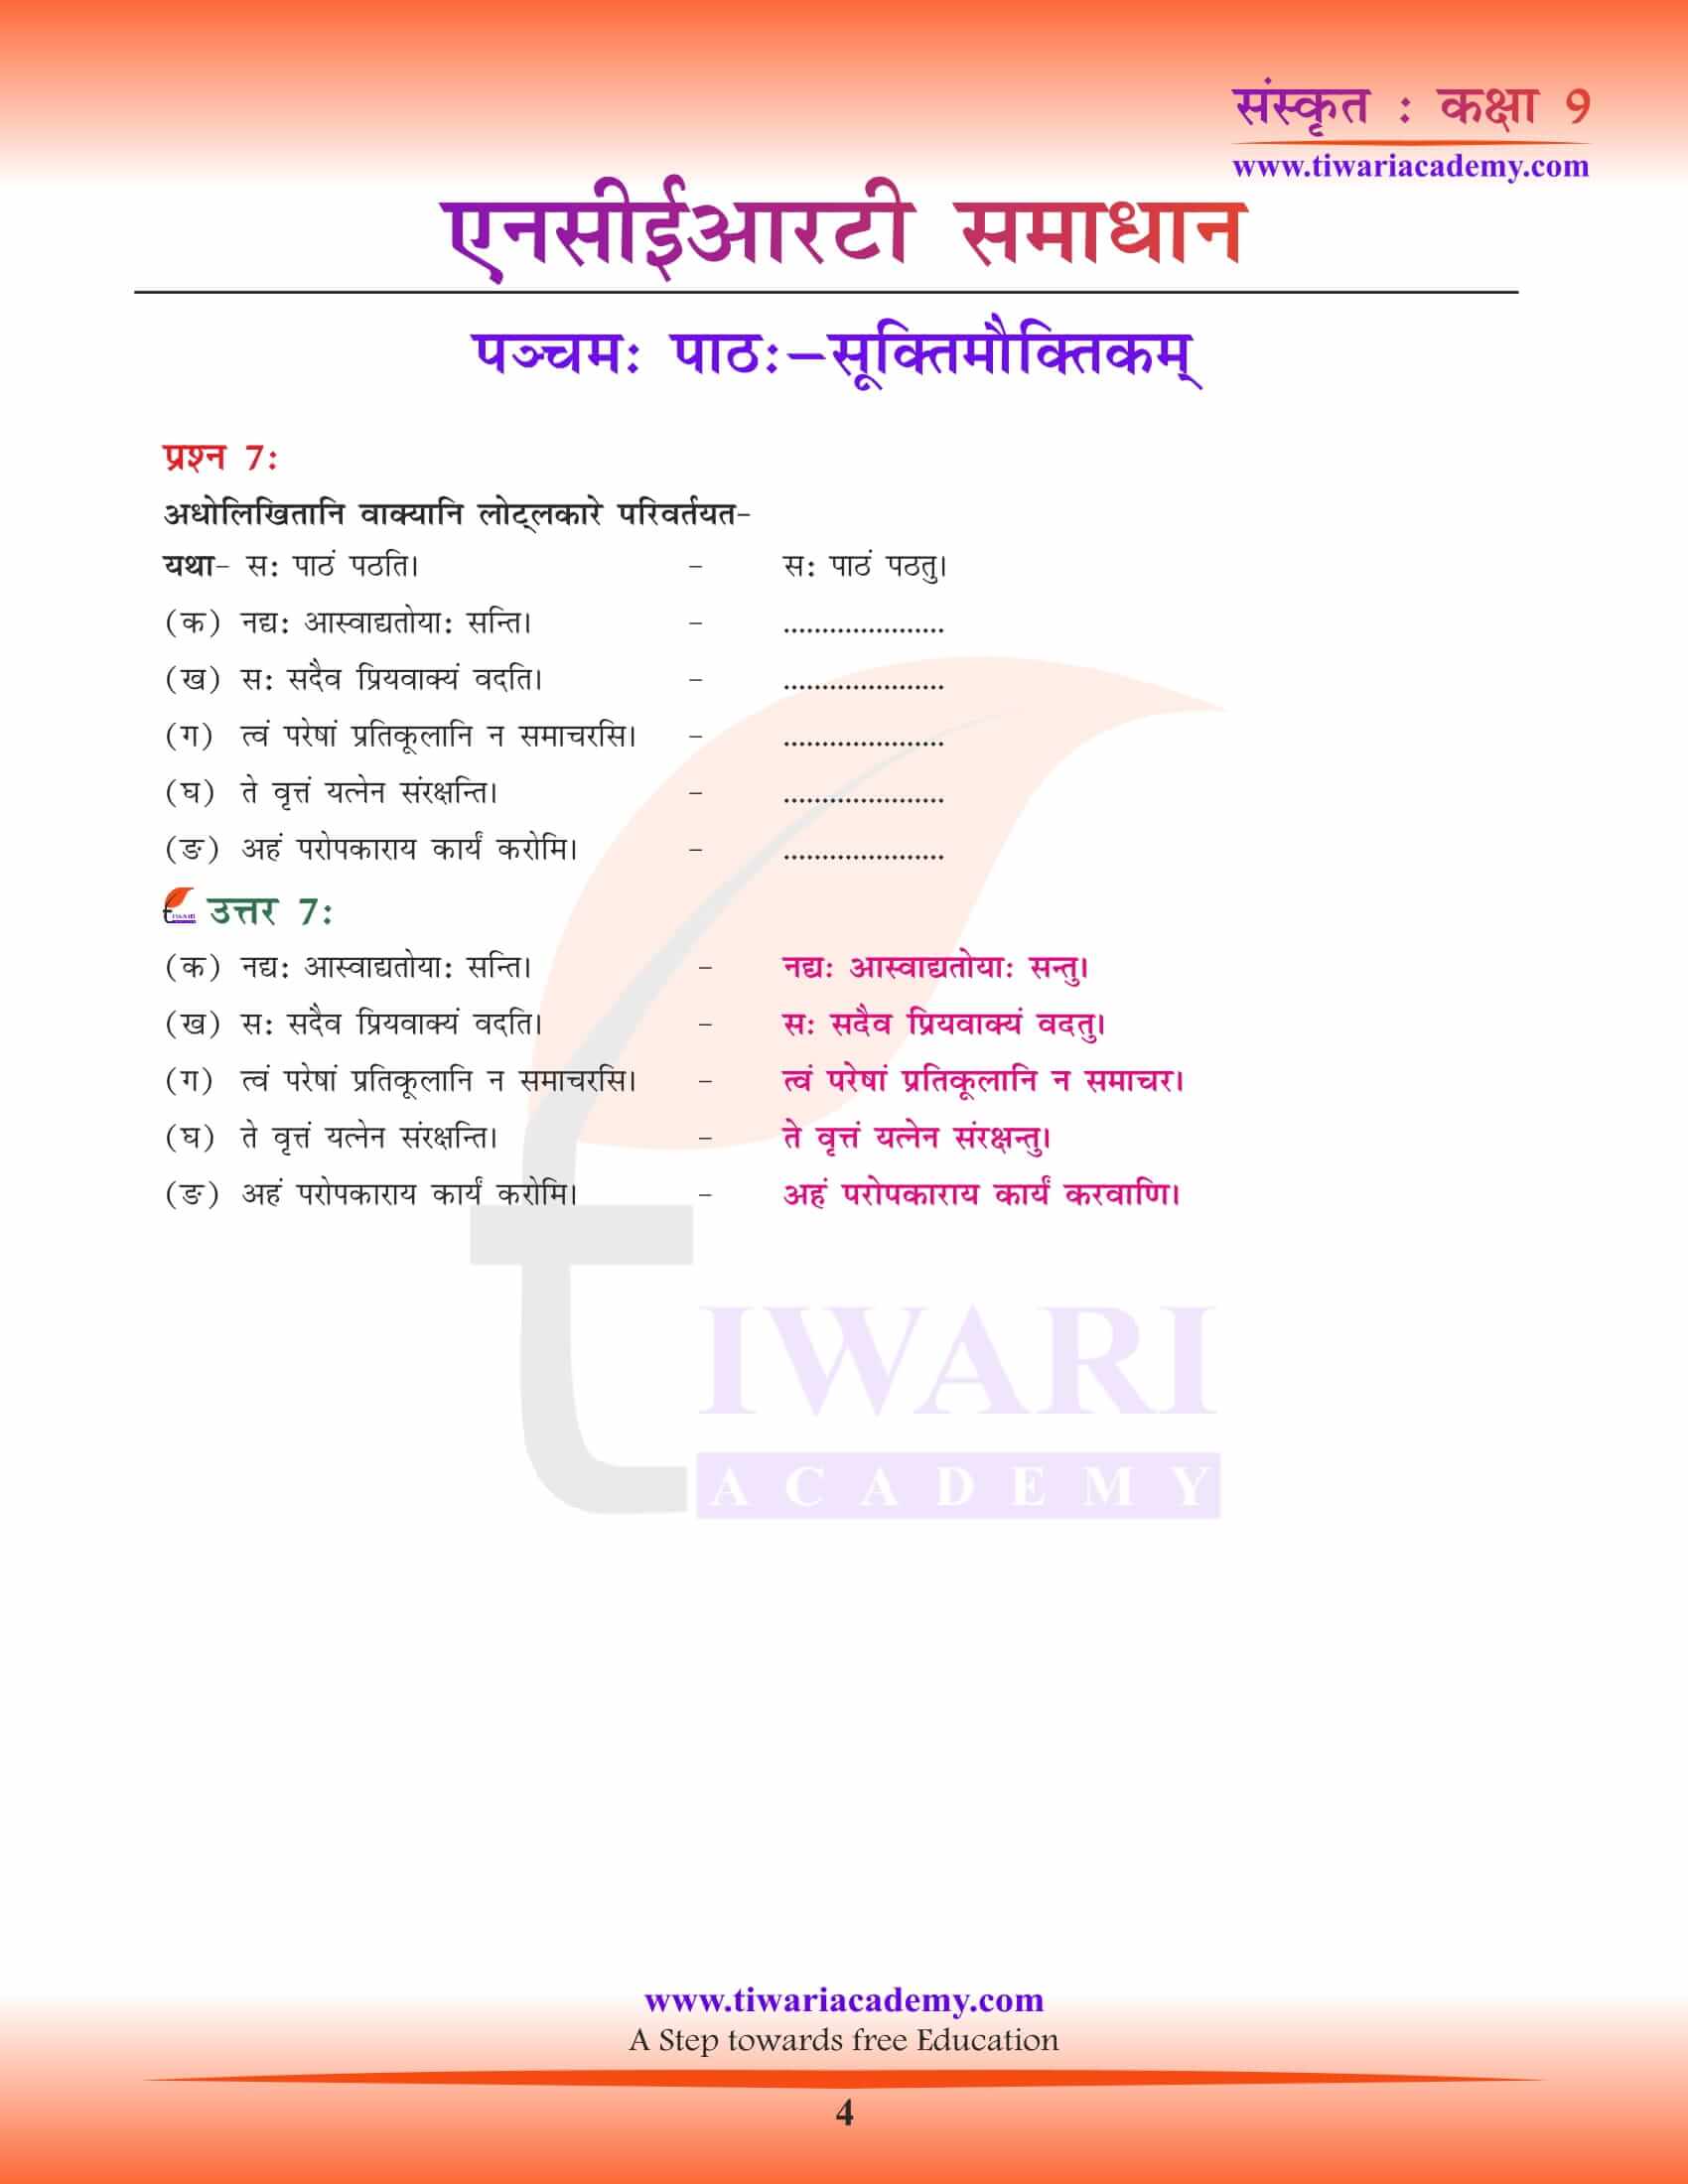 NCERT Solutions for Class 9 Sanskrit Chapter 5 all question answers